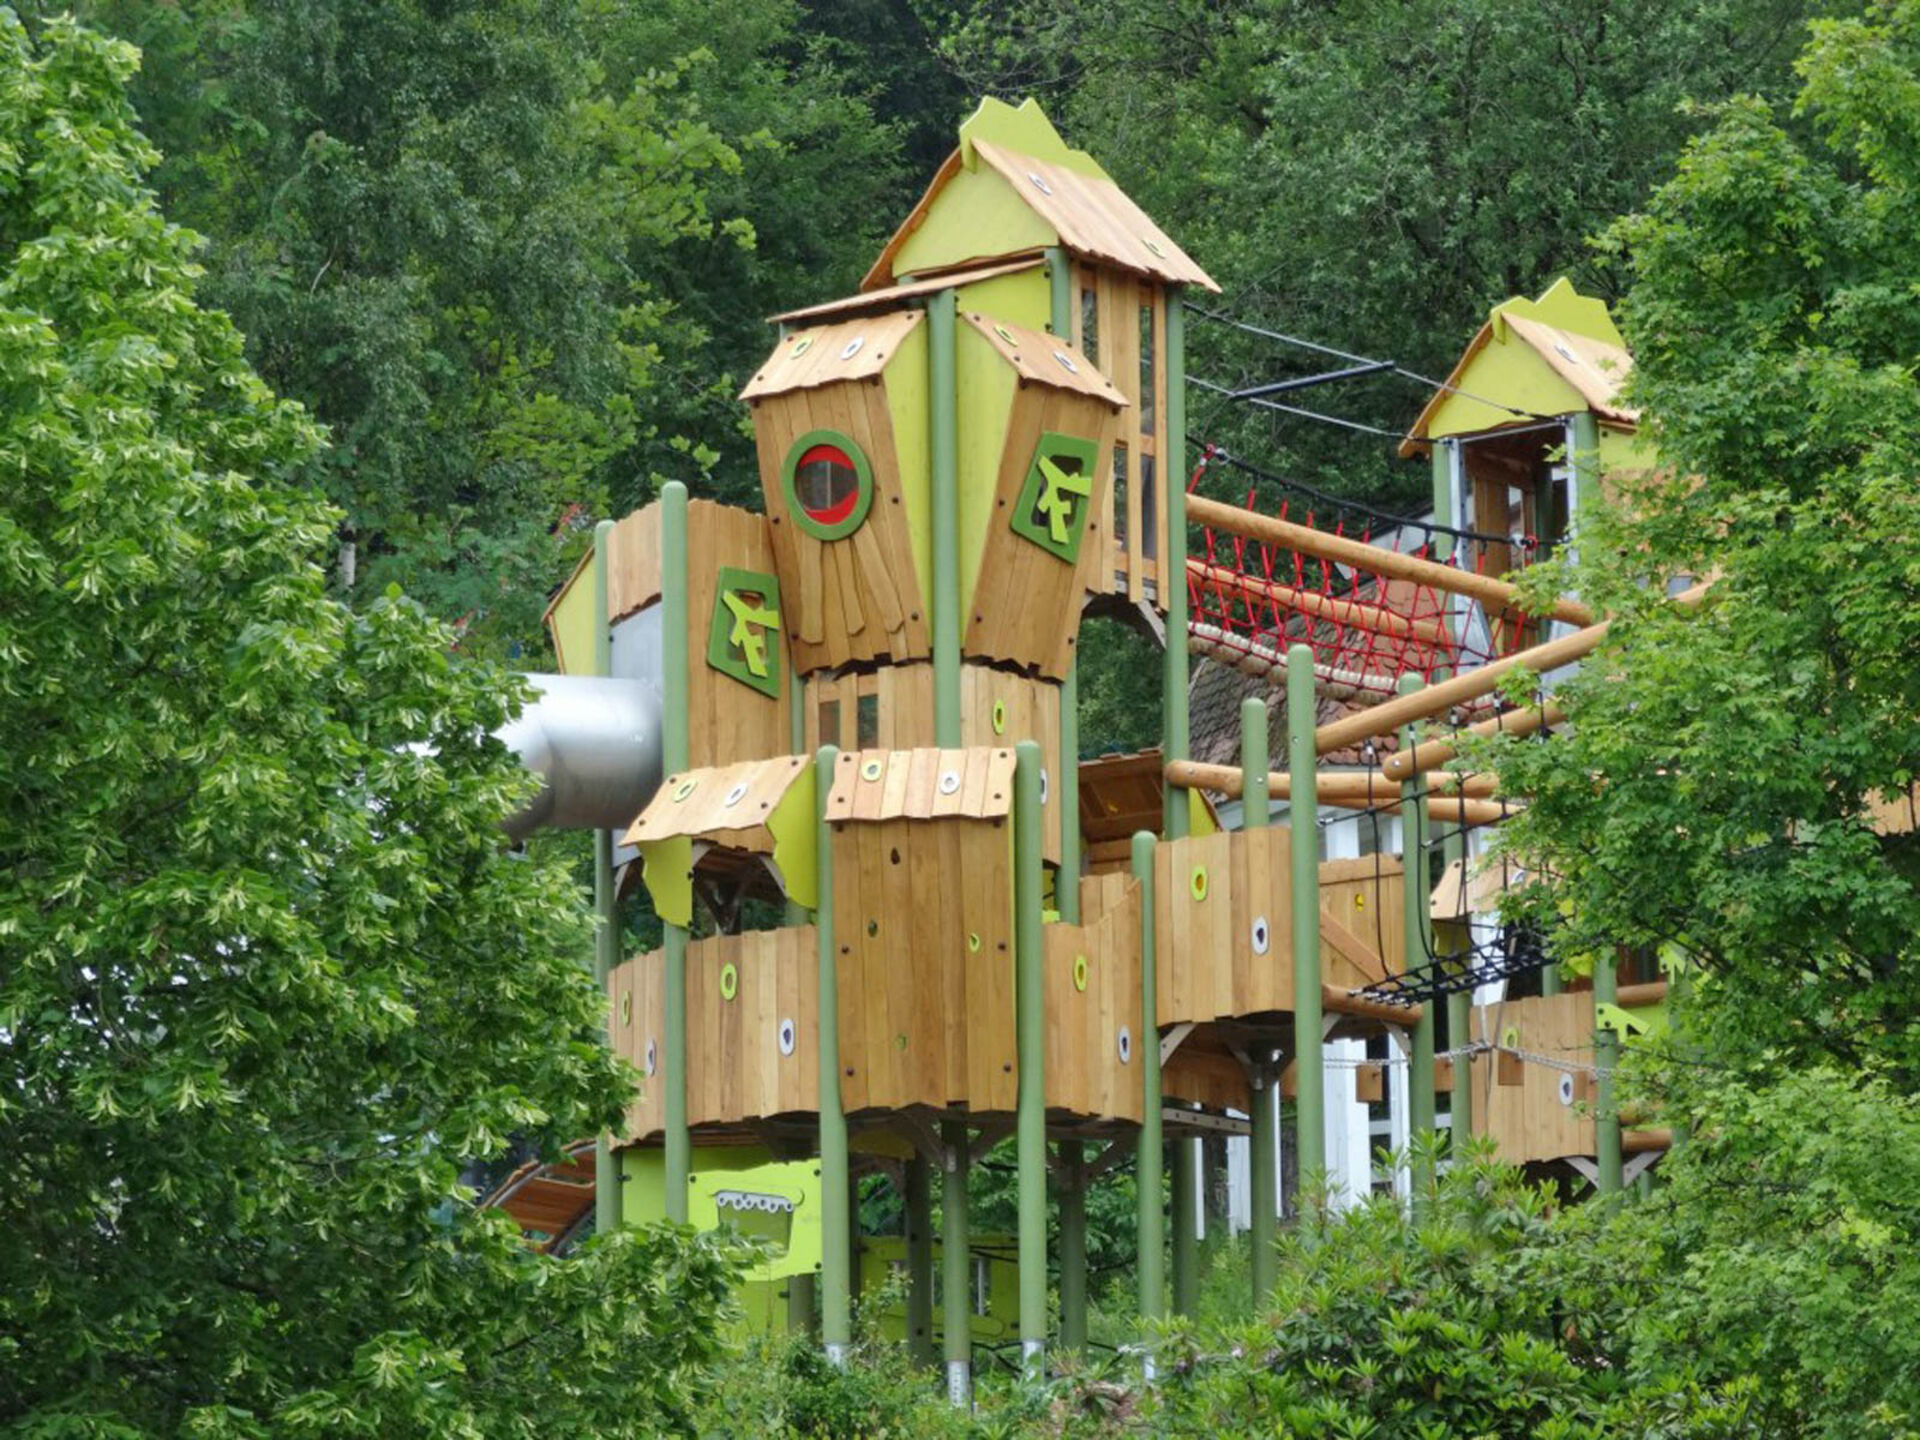 Beaver's lodge and climbing facility in the Panorama Park in Kirchhundem in the Sauerland